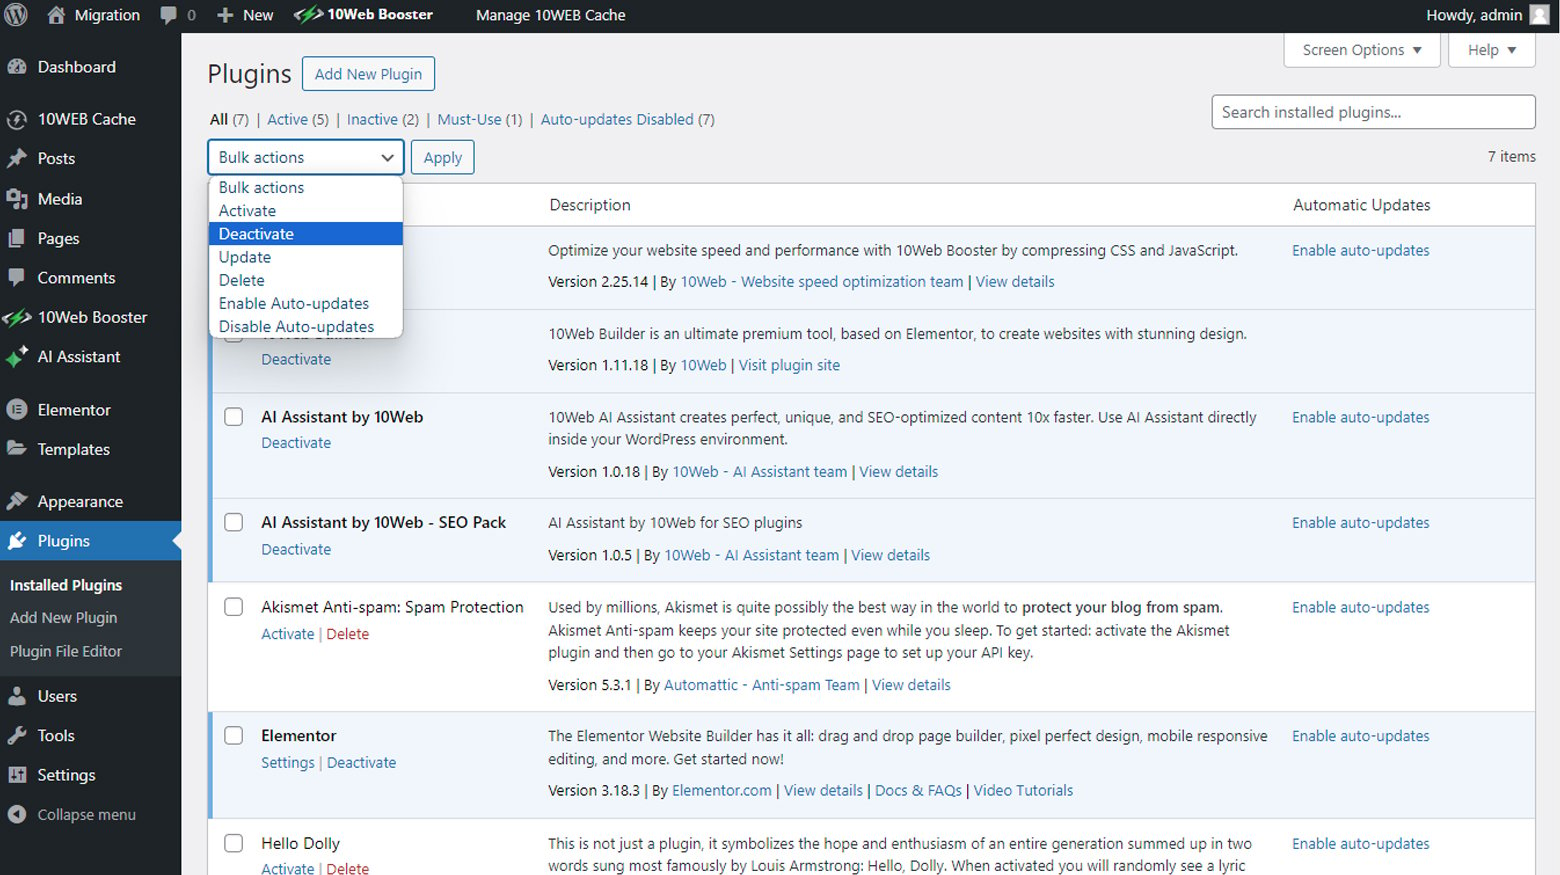 WordPress admin dashboard plugins page with bulk action for deactivation selected.